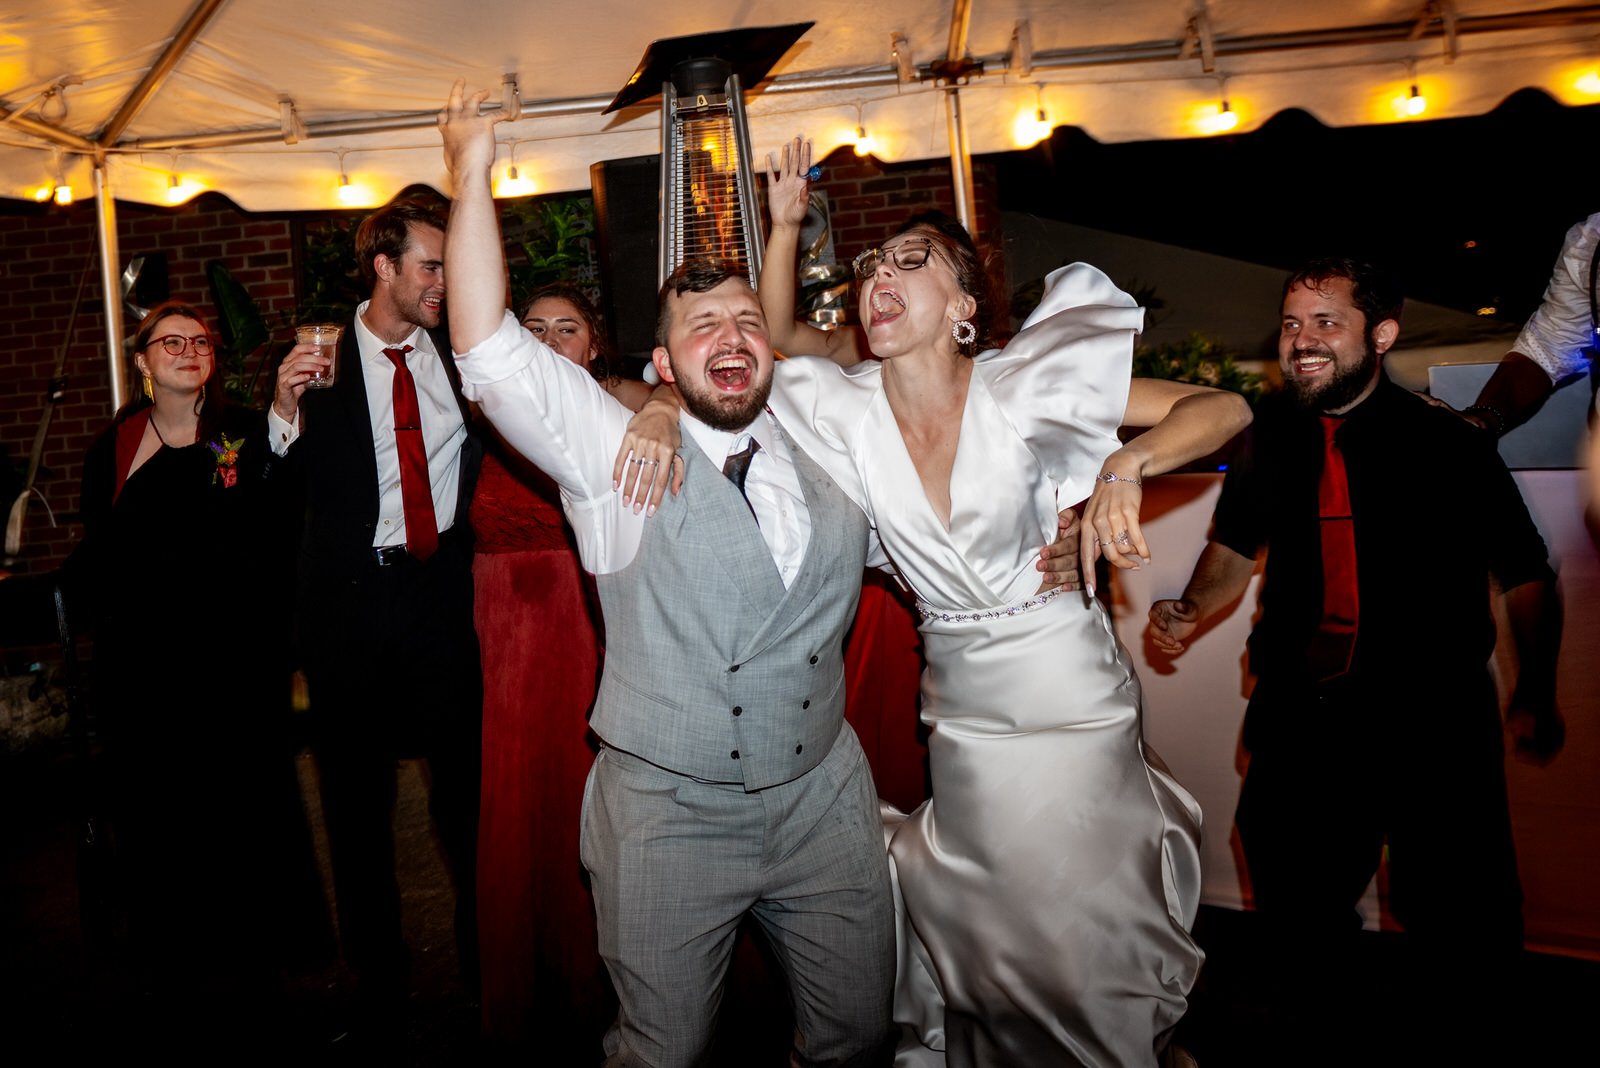 Ampersea_Baltimore_Maryland_Wedding_Suzanne&Andrew_Dance_Party-7077.jpg